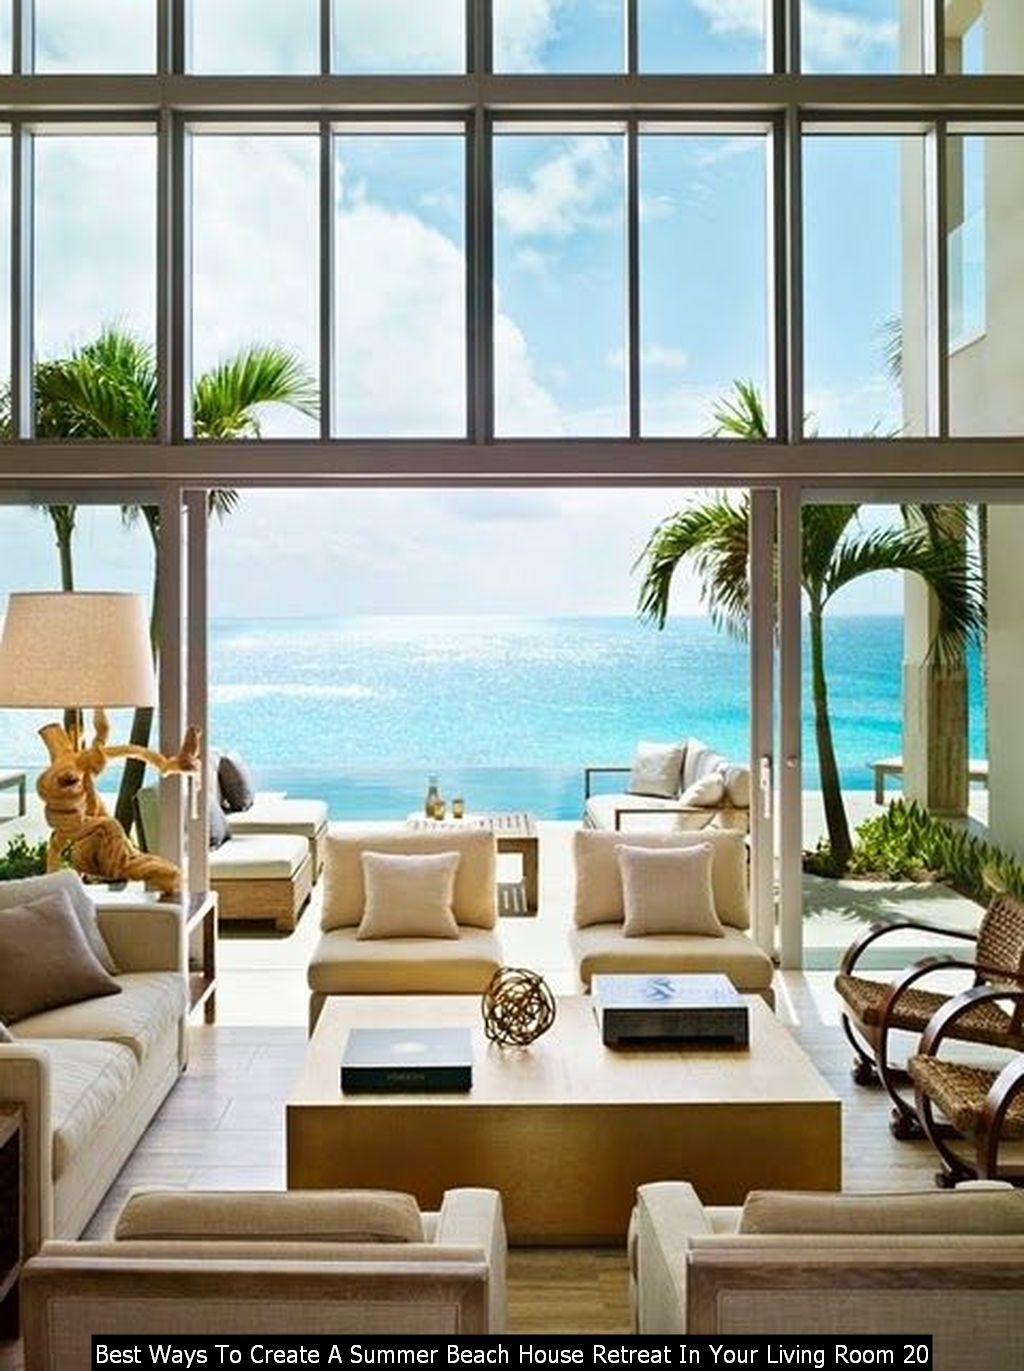 Best Ways To Create A Summer Beach House Retreat In Your Living Room 20